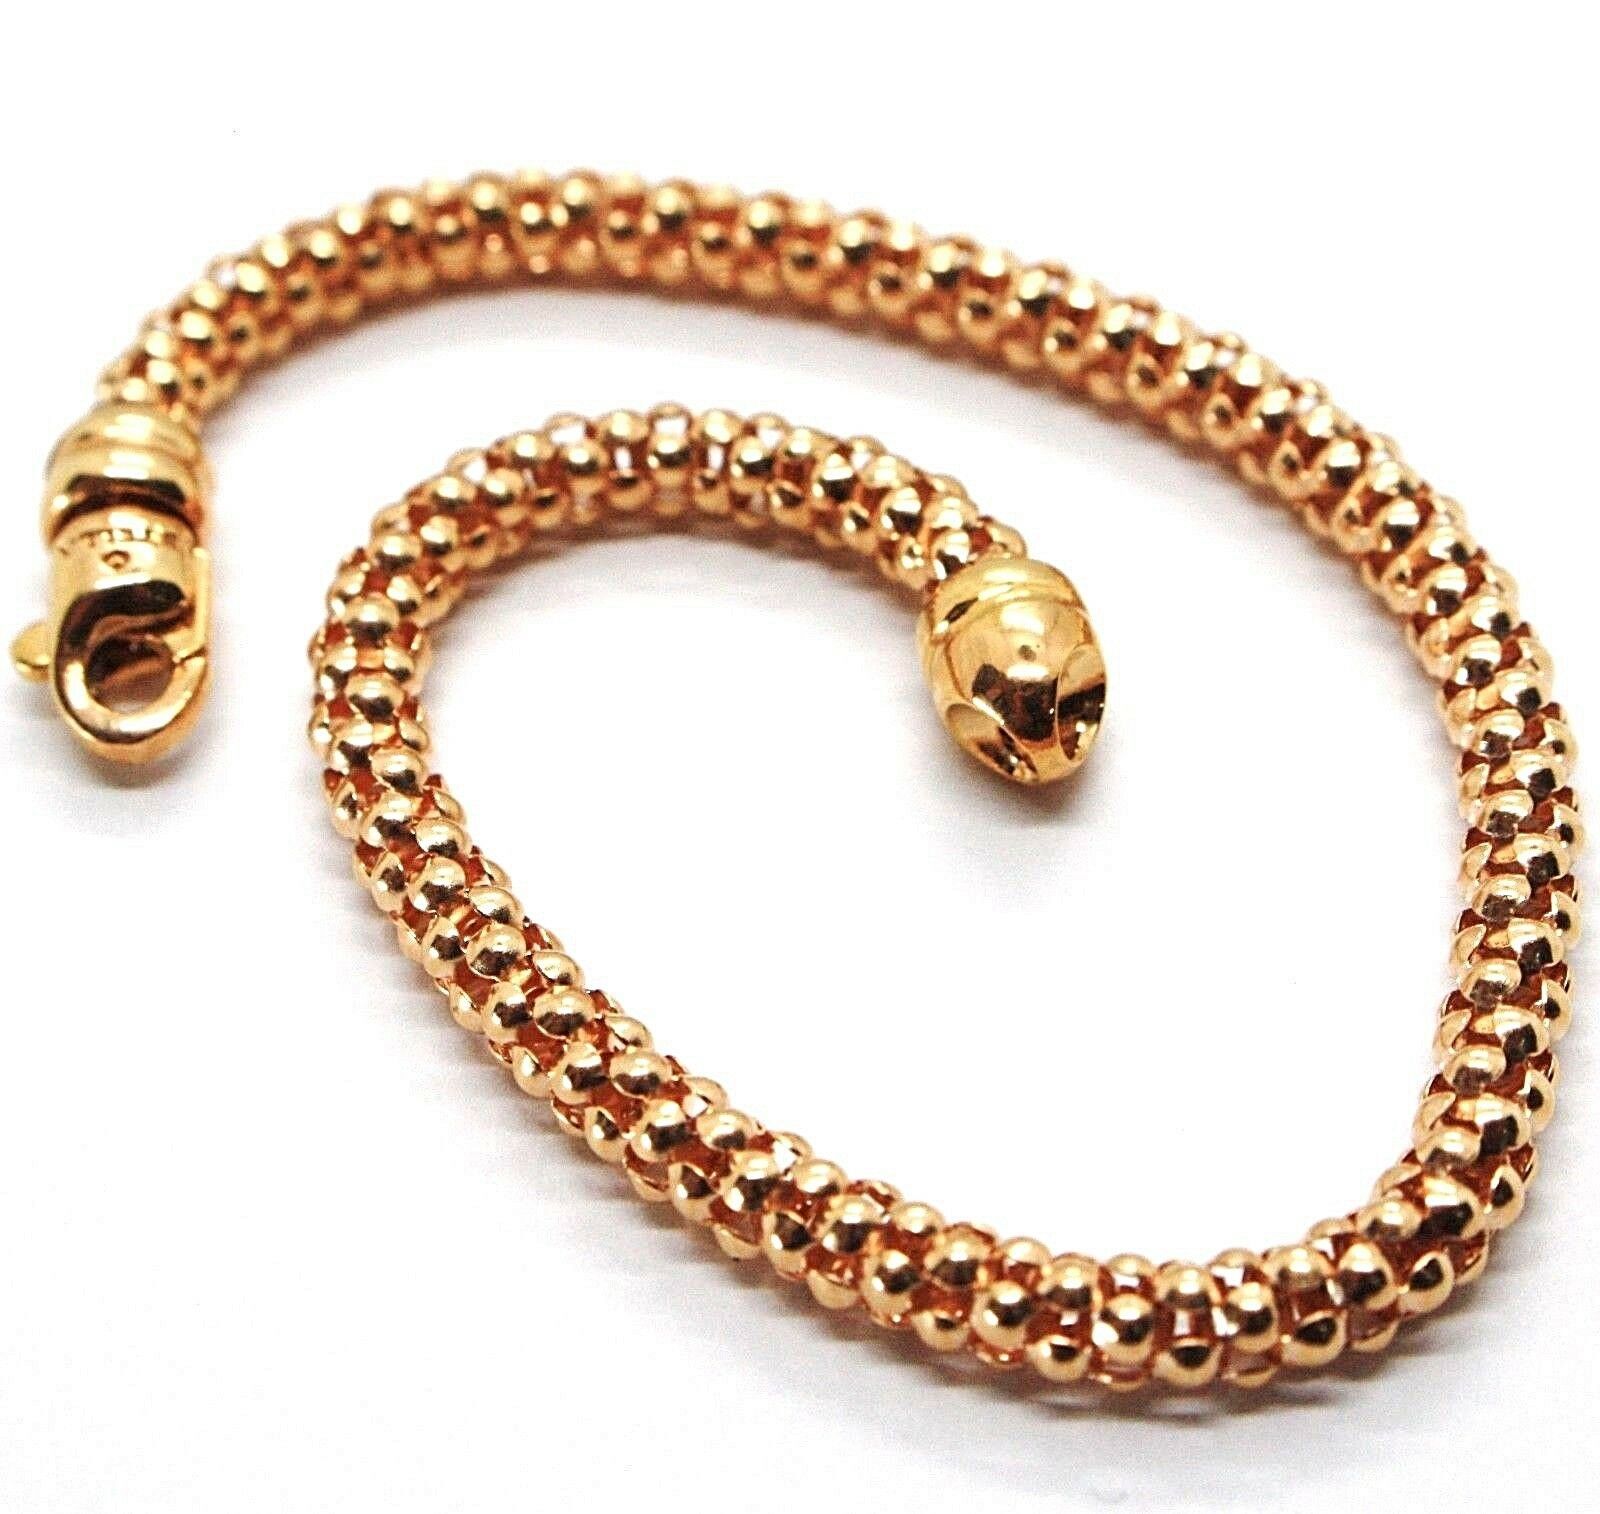 Primary image for 18K ROSE GOLD BRACELET, 18.5 CM, 7.3 INCHES, BASKET WEAVE TUBE, 4 MM THICKNESS